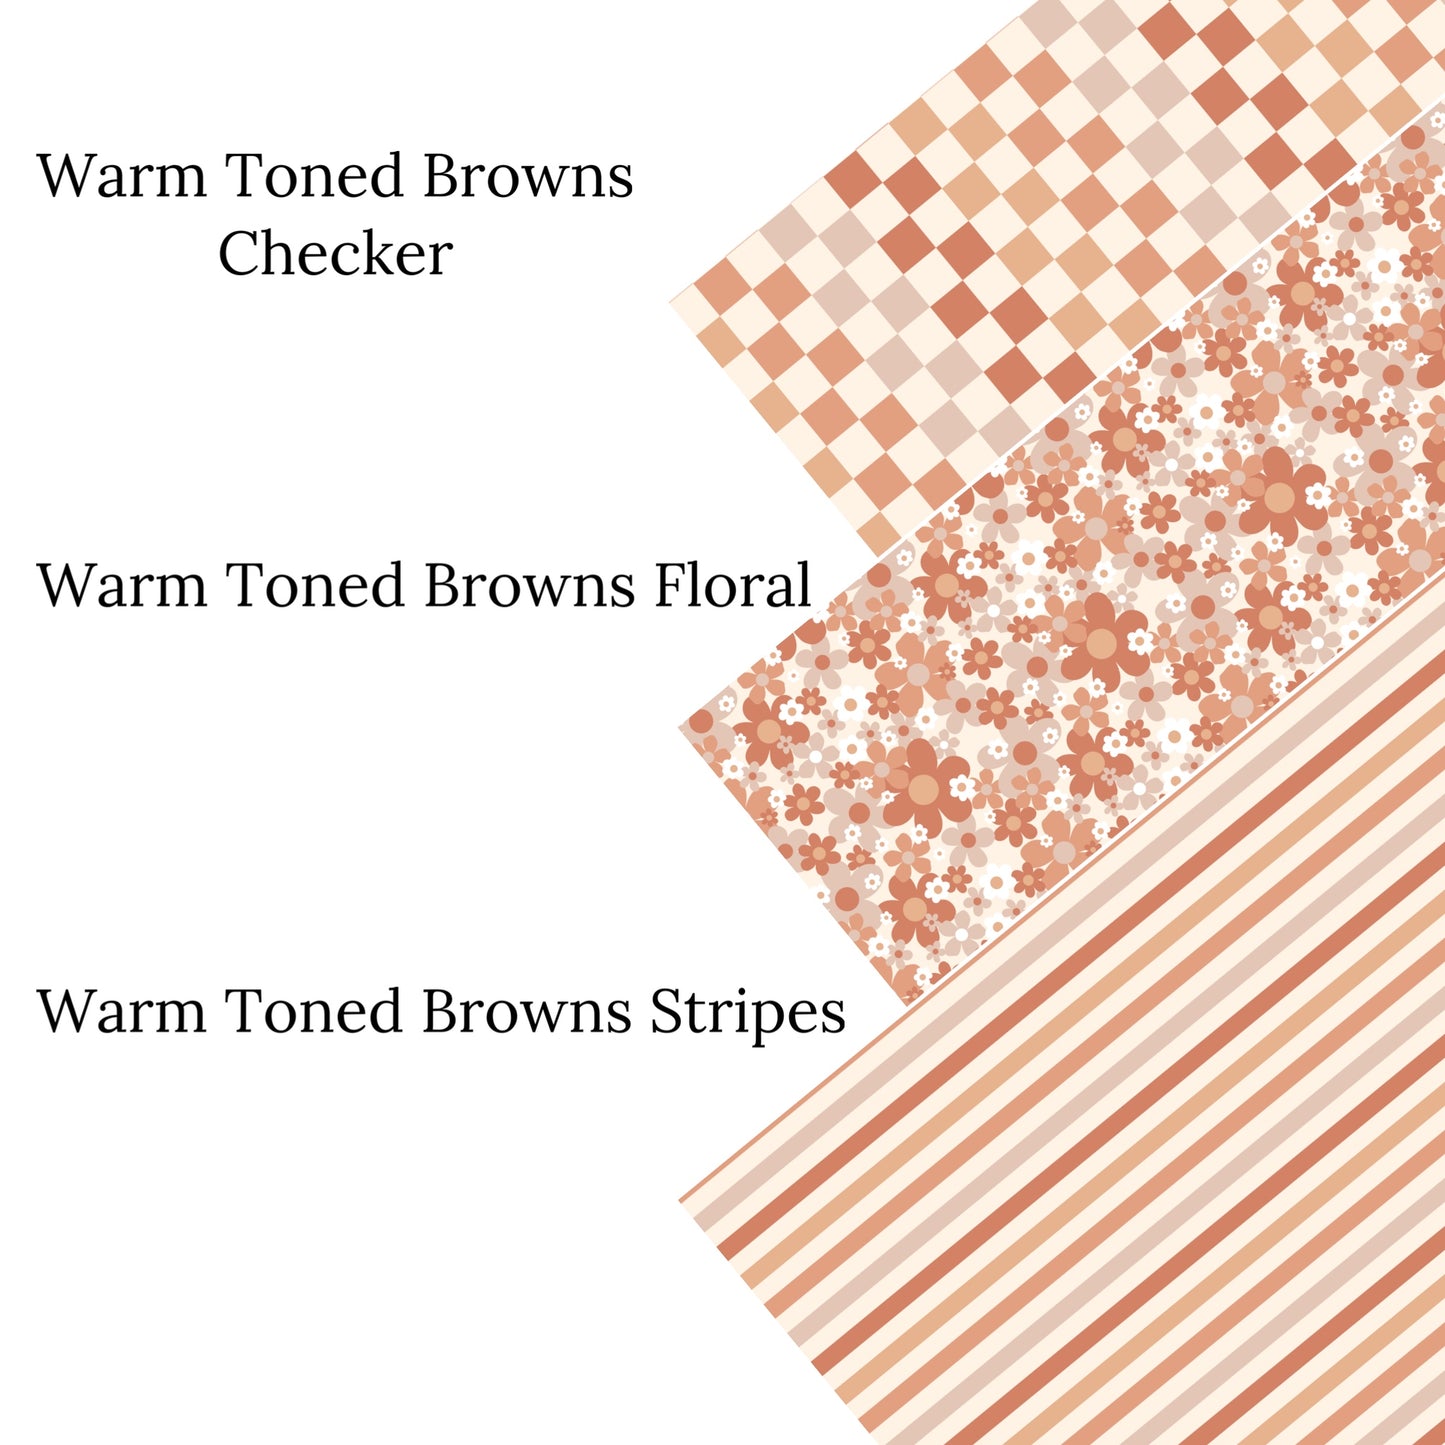 Warm Toned Browns Floral Faux Leather Sheets